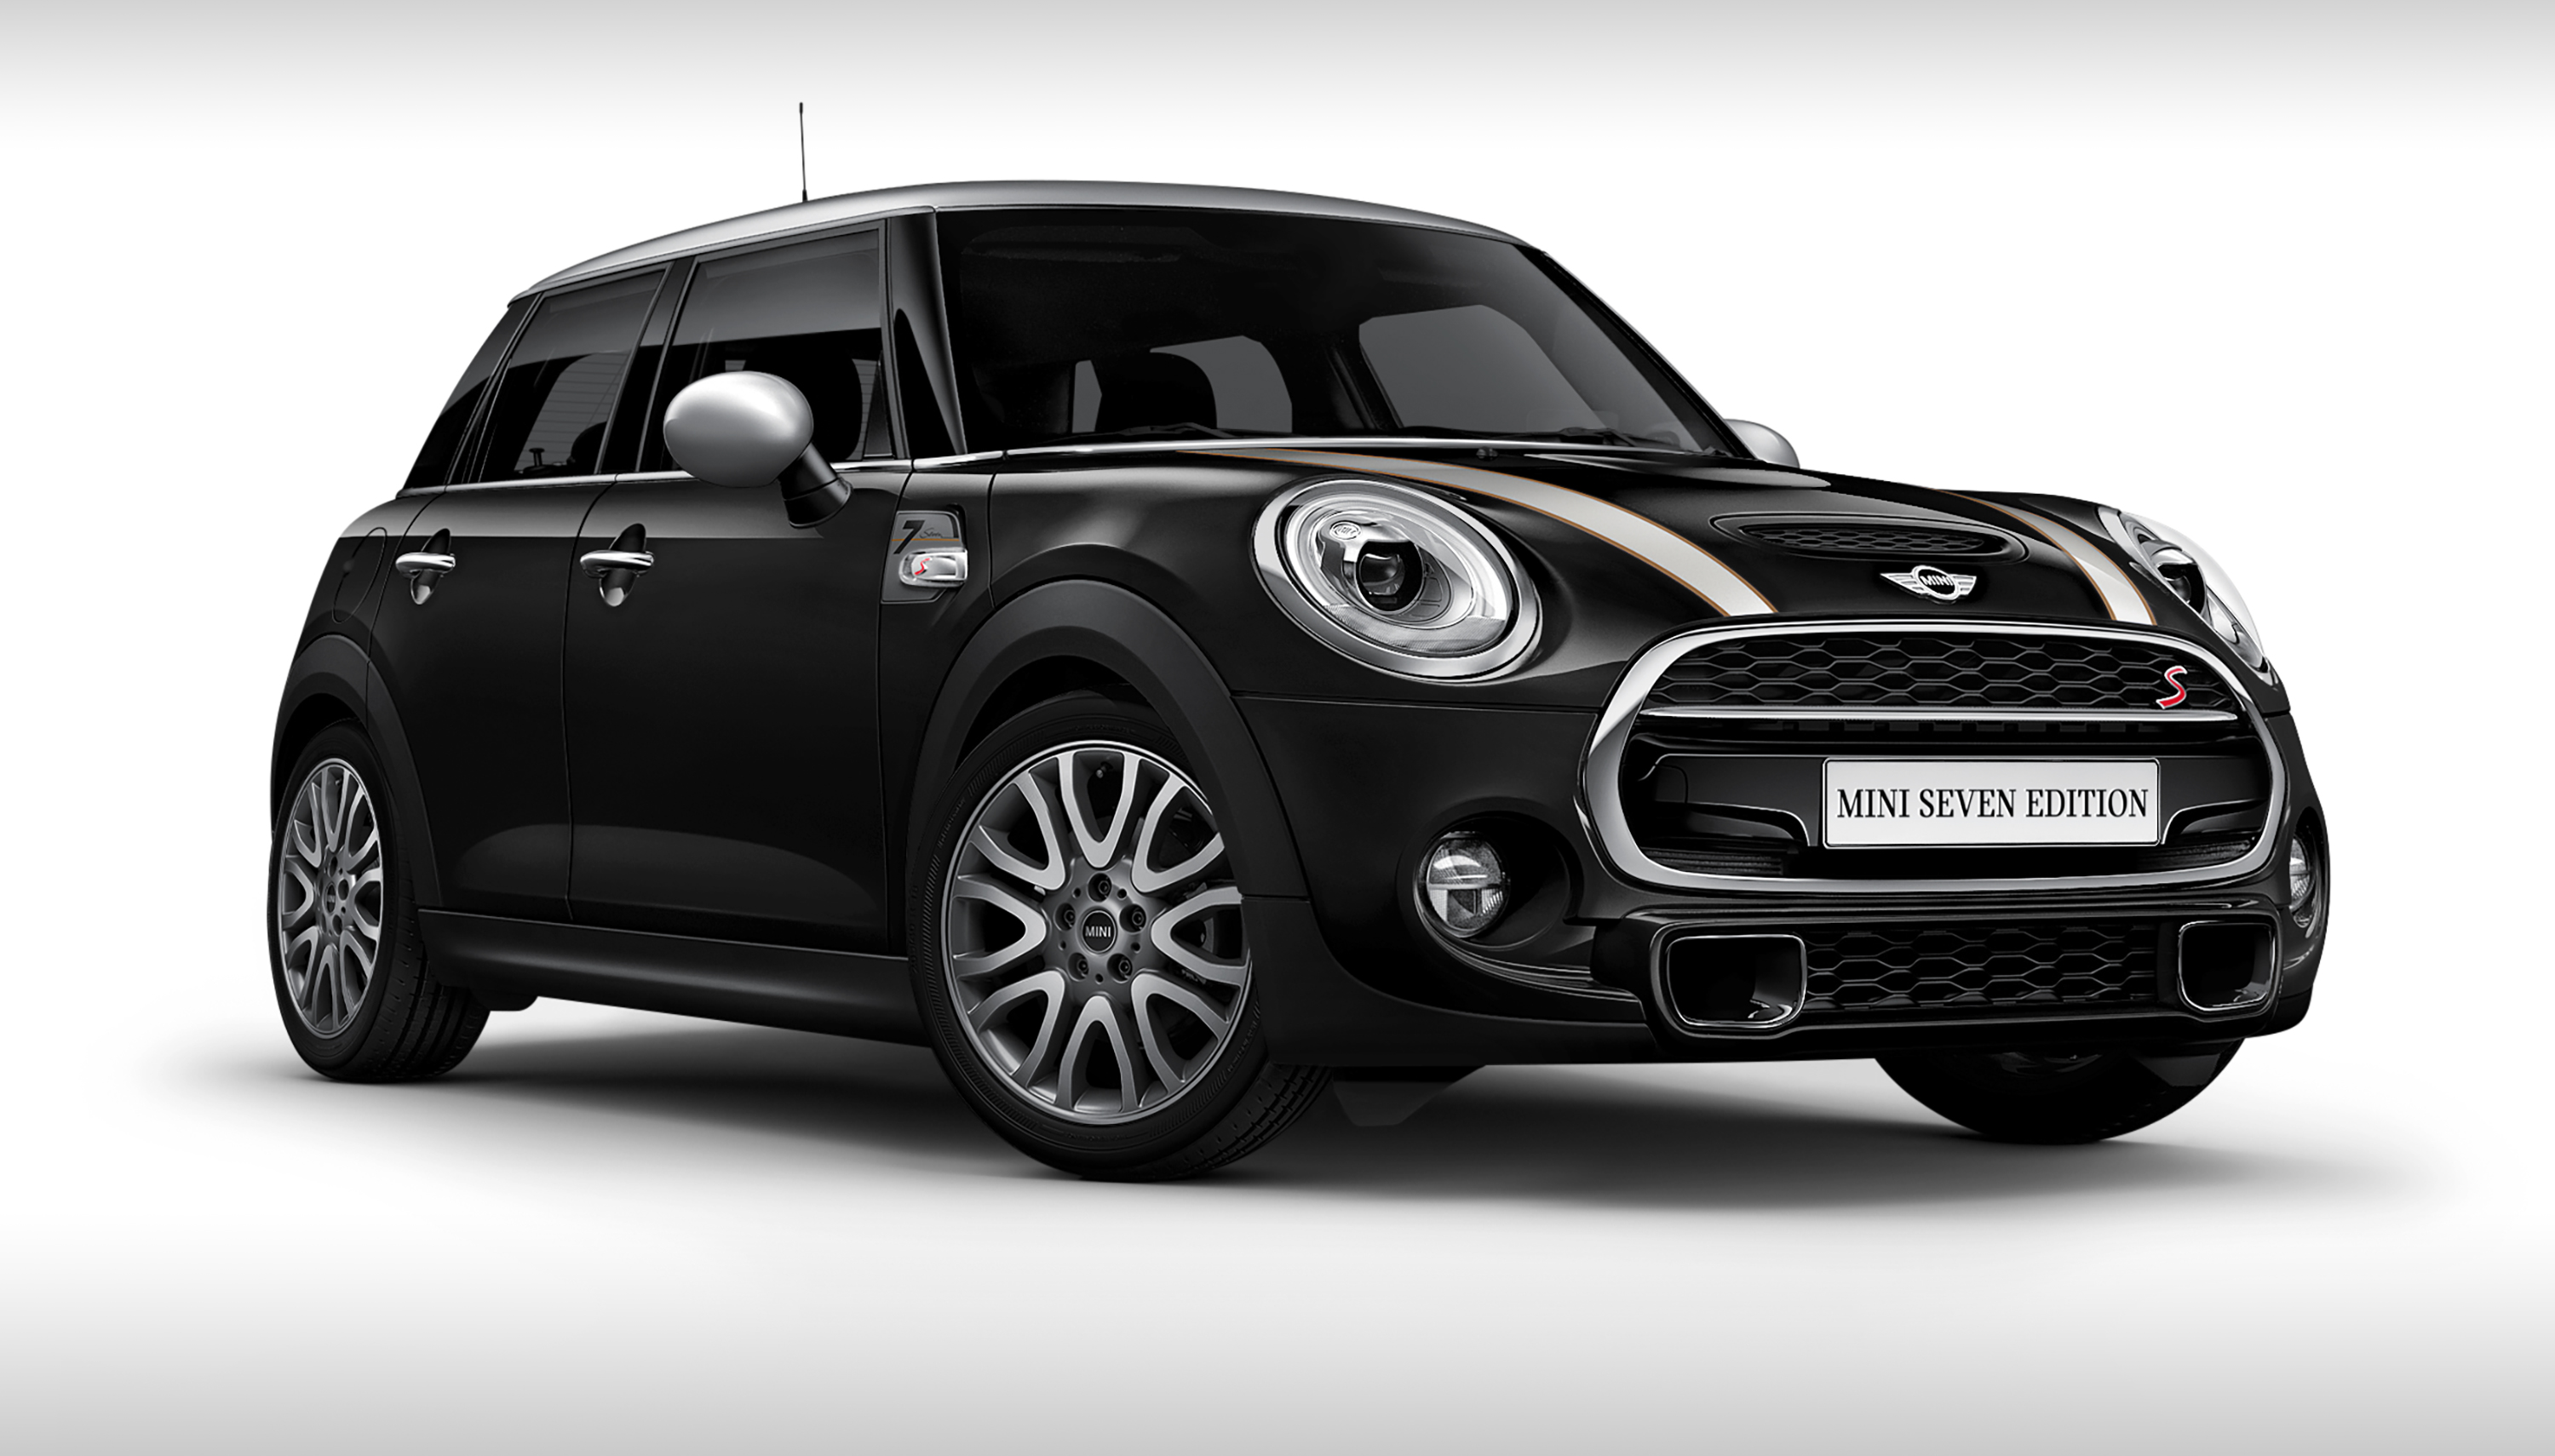 2017 Mini Seven special edition arrives in Australia - Photos (1 of 13)